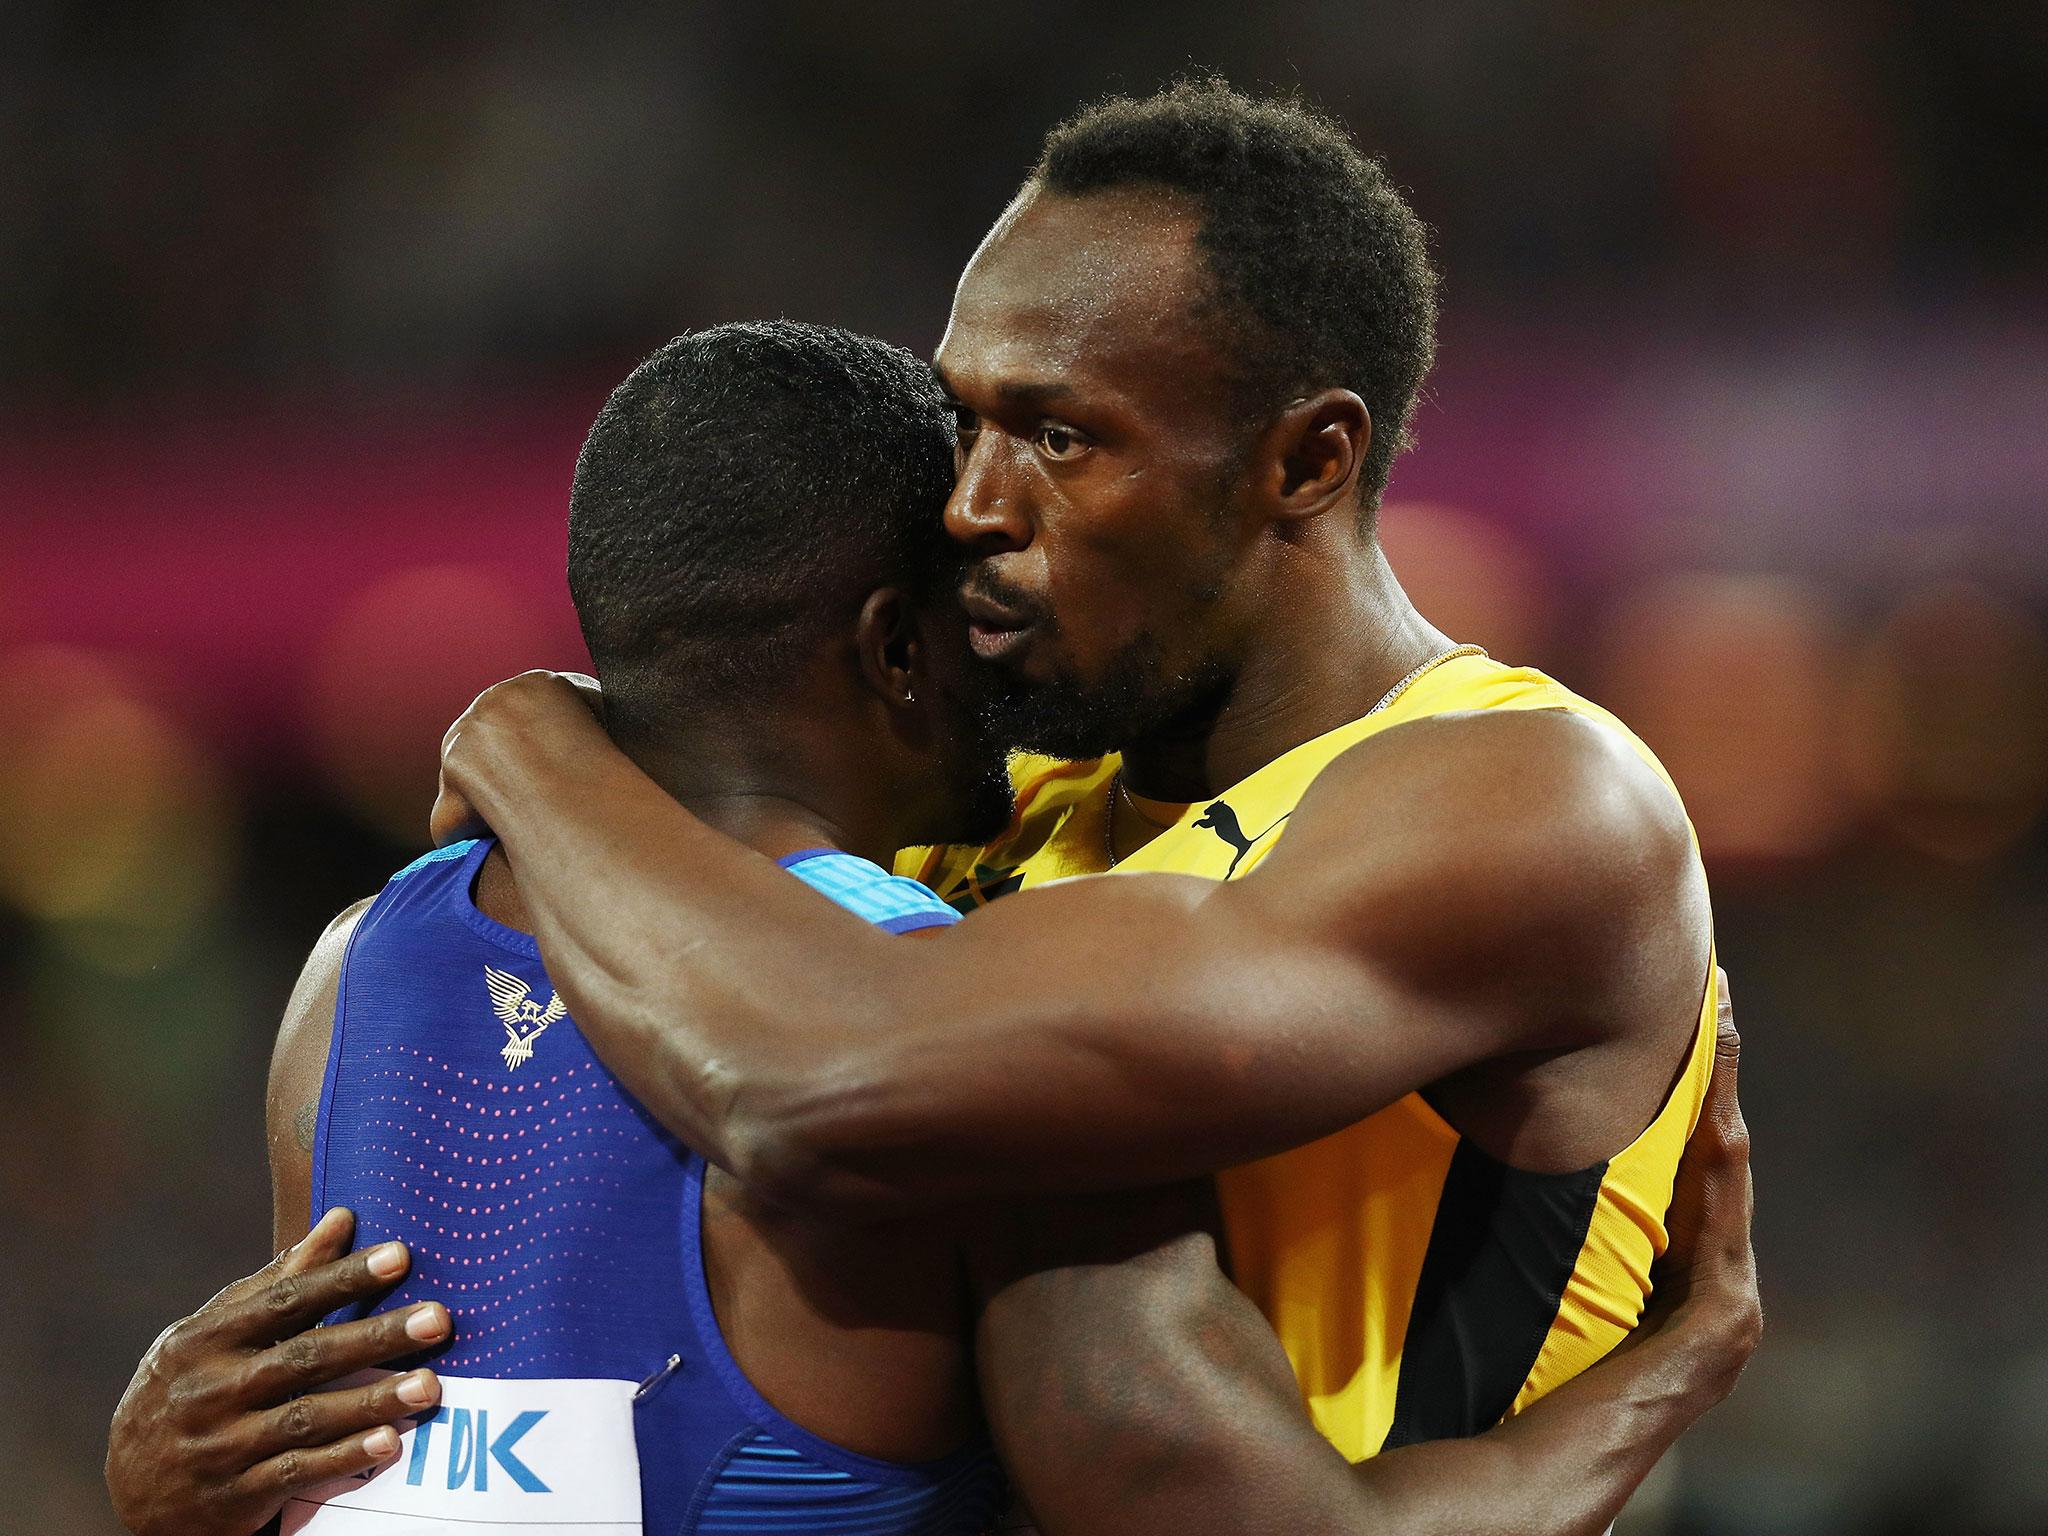 Gatlin beat Bolt to 100m gold in the summer